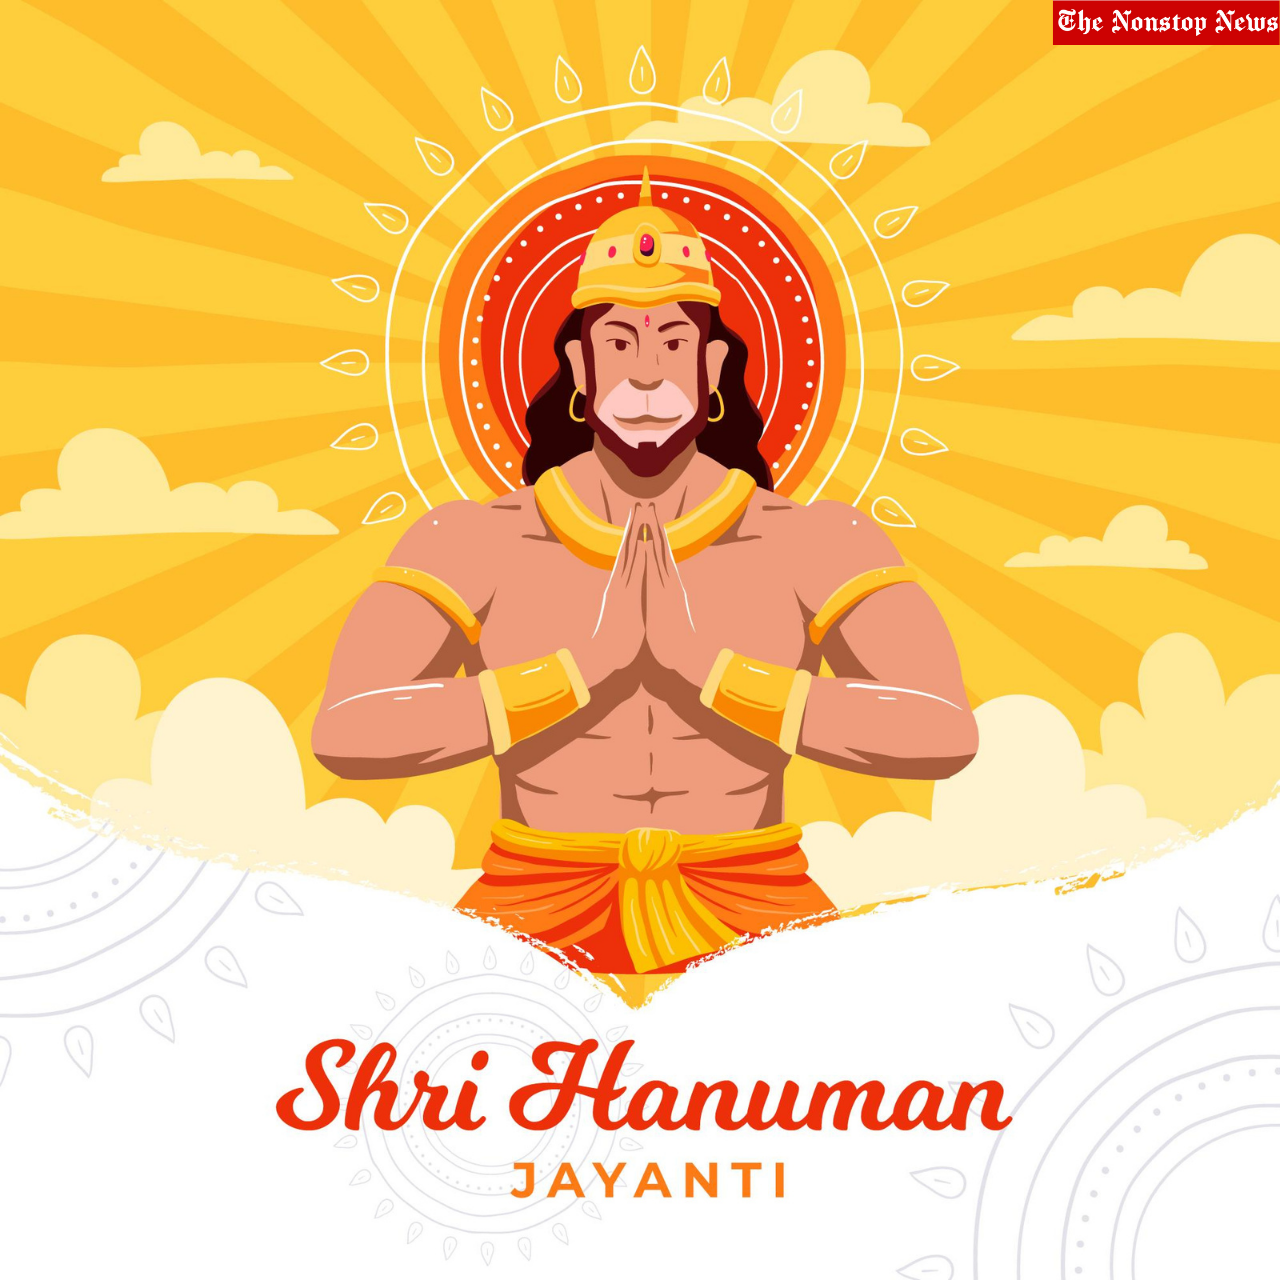 Happy Hanuman Jayanti 2022: Best Wishes, HD Images, Messages, Quotes, Greetings, Posters To Greet Your Loved Ones